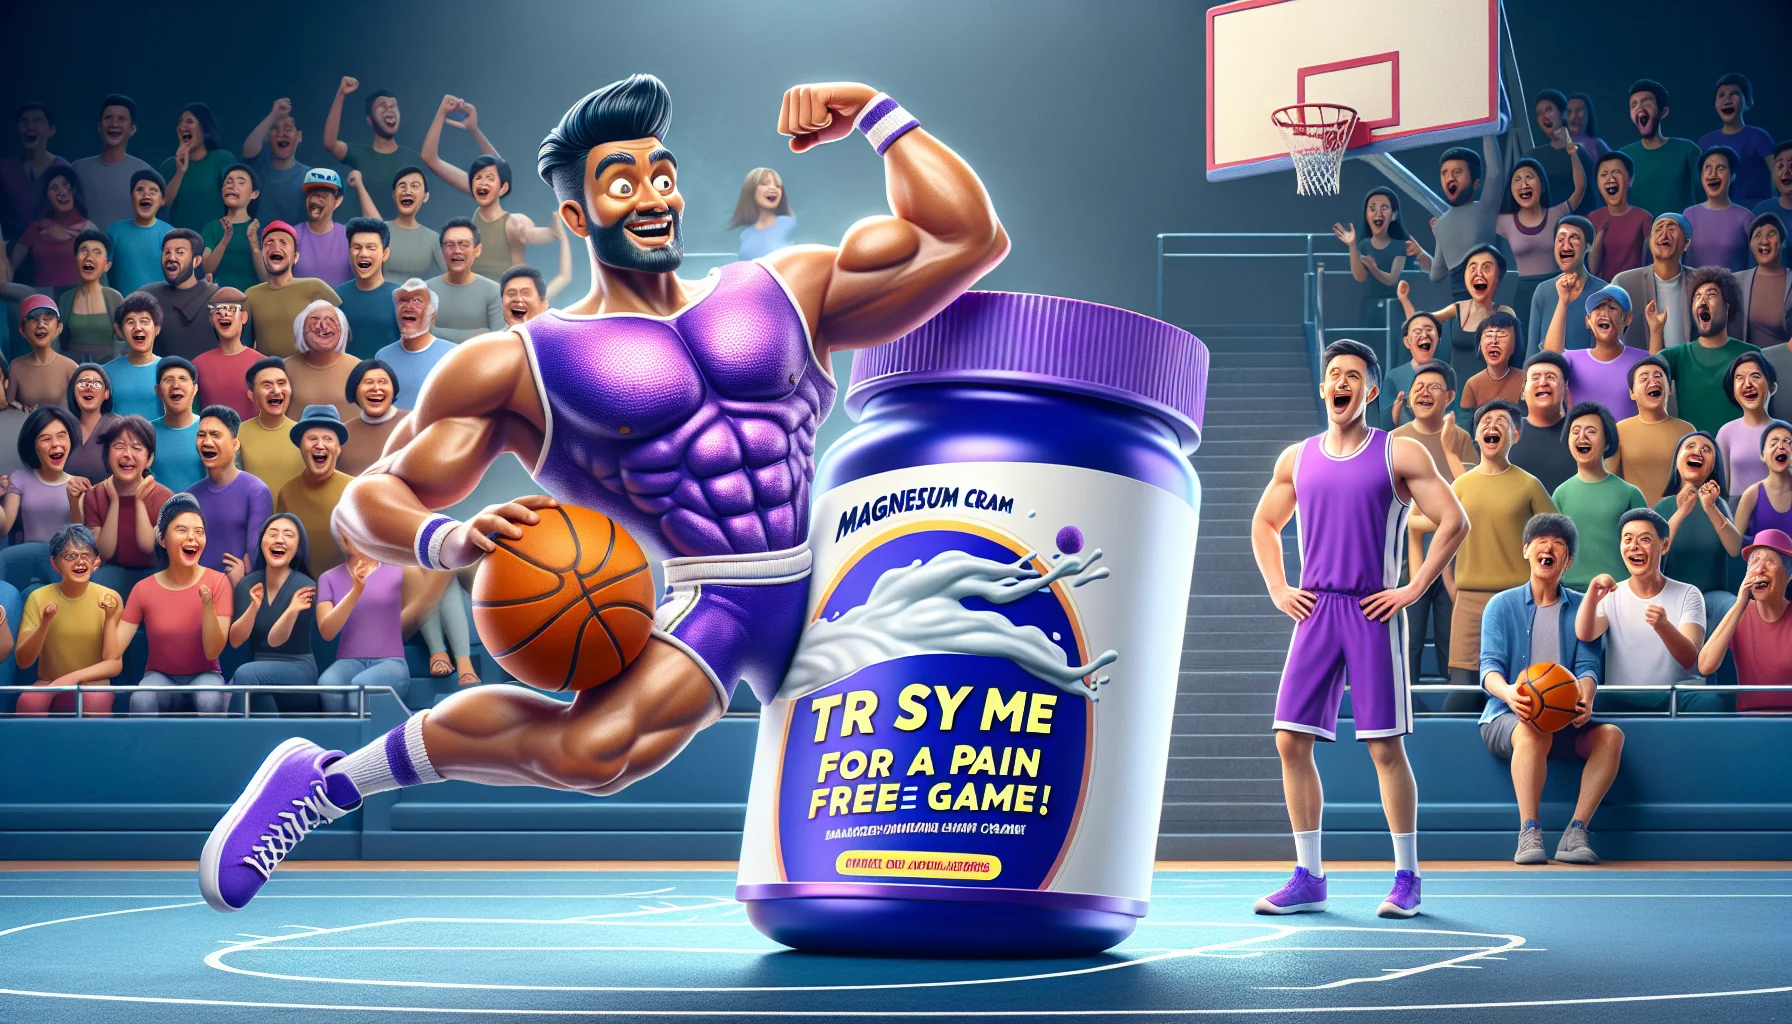 Create a humorous image showing a basketball court setting. In the foreground, there's an animated, life-sized bottle of magnesium cream with cartoonish features, flexing its muscles after blocking a basketball shot. The handsome South Asian man who threw the shot is looking surprised and he's clad in beautiful purple sportswear. The audience in the background includes people of various descents and genders, laughing and cheering. Also, include a fun stylized text bubble from the magnesium cream saying, 'Try me for a pain-free game!' The setting should be inviting, promoting the idea that such supplements can help in sports.